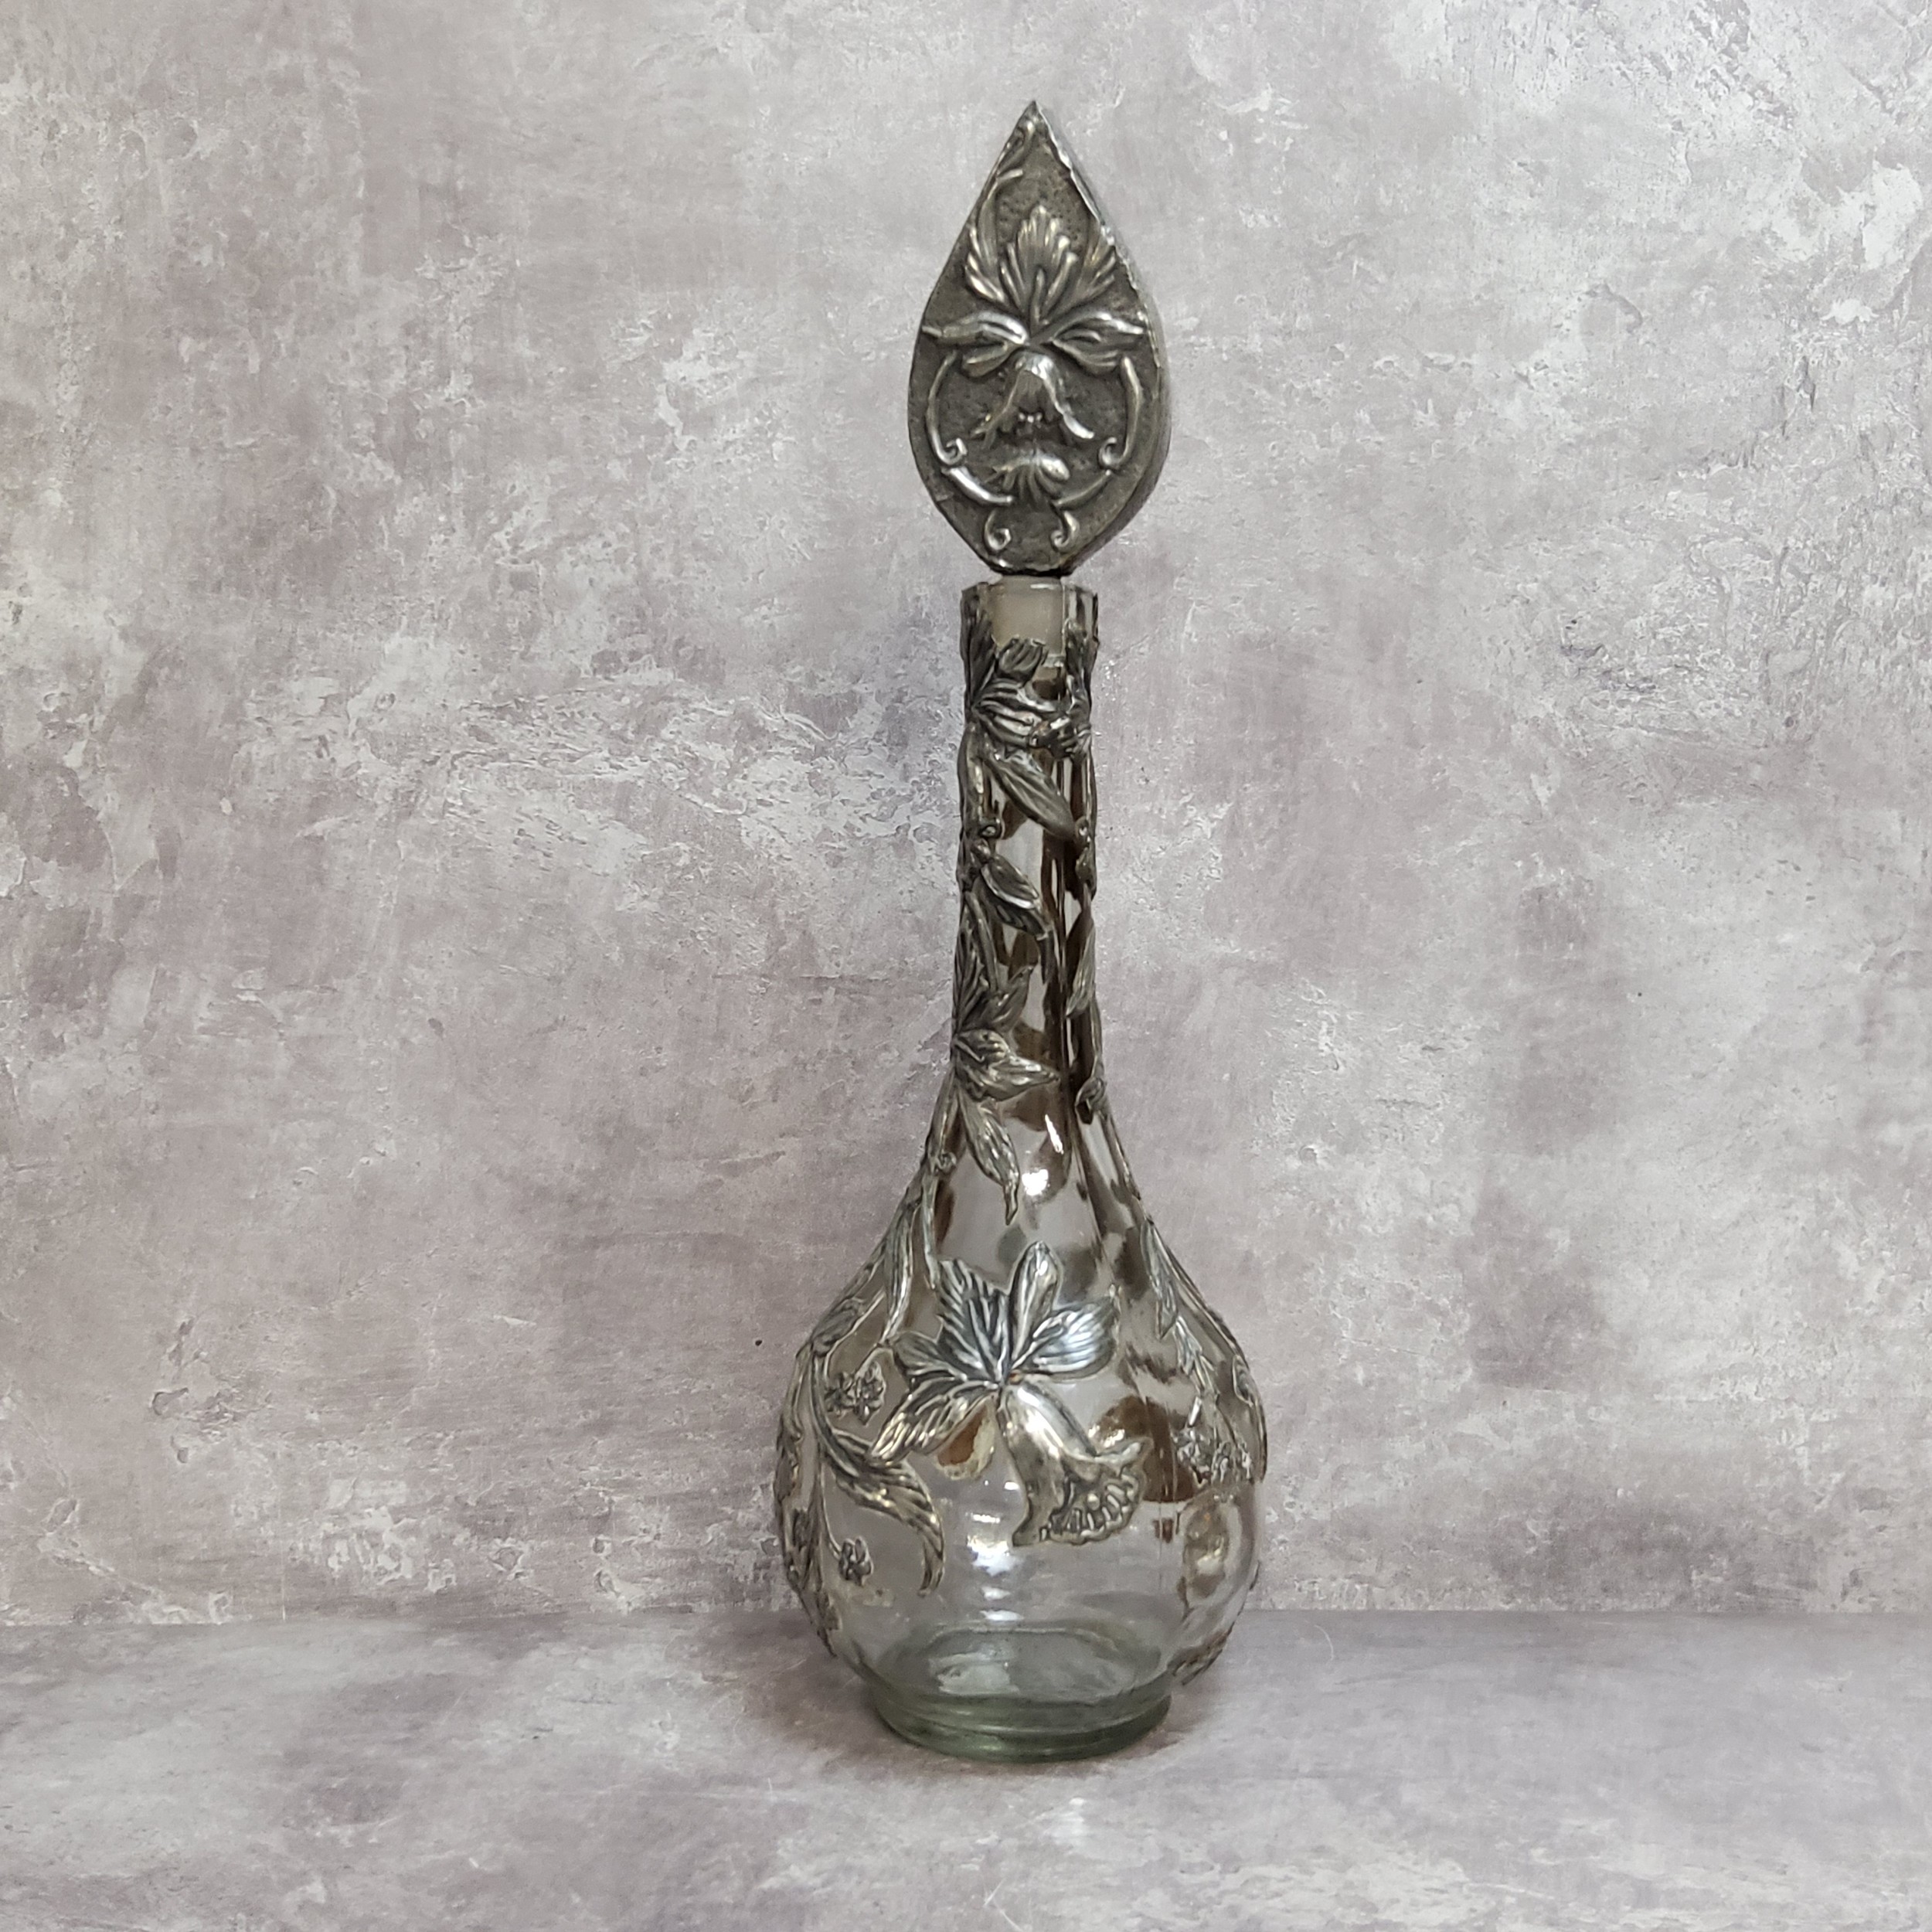 A period Art Nouveau globe and stem shaft vase decorated with sinuous pewter applied reliefwork - Image 3 of 3